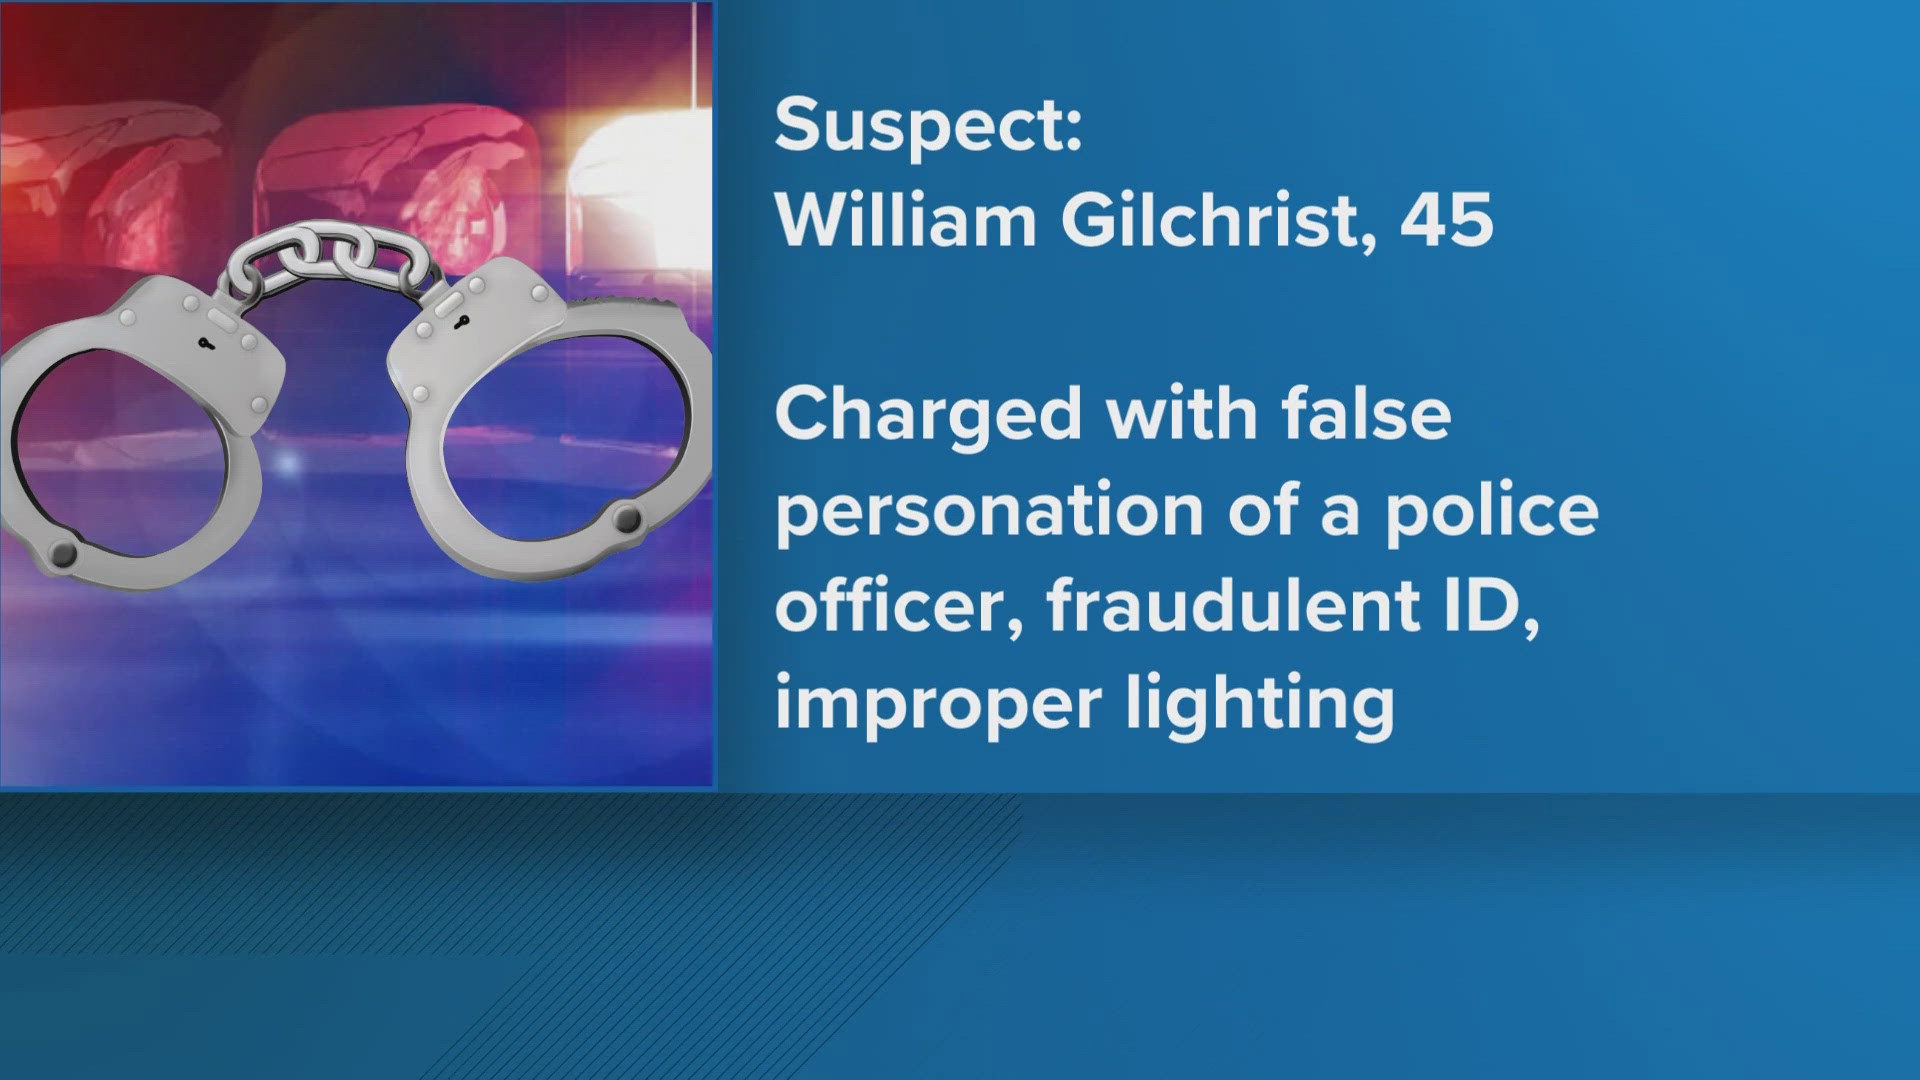 The 45-year-old Mississippi man was allegedly using fake U.S. Marshal's Service identification and unlawful blue police lights attached to truck.